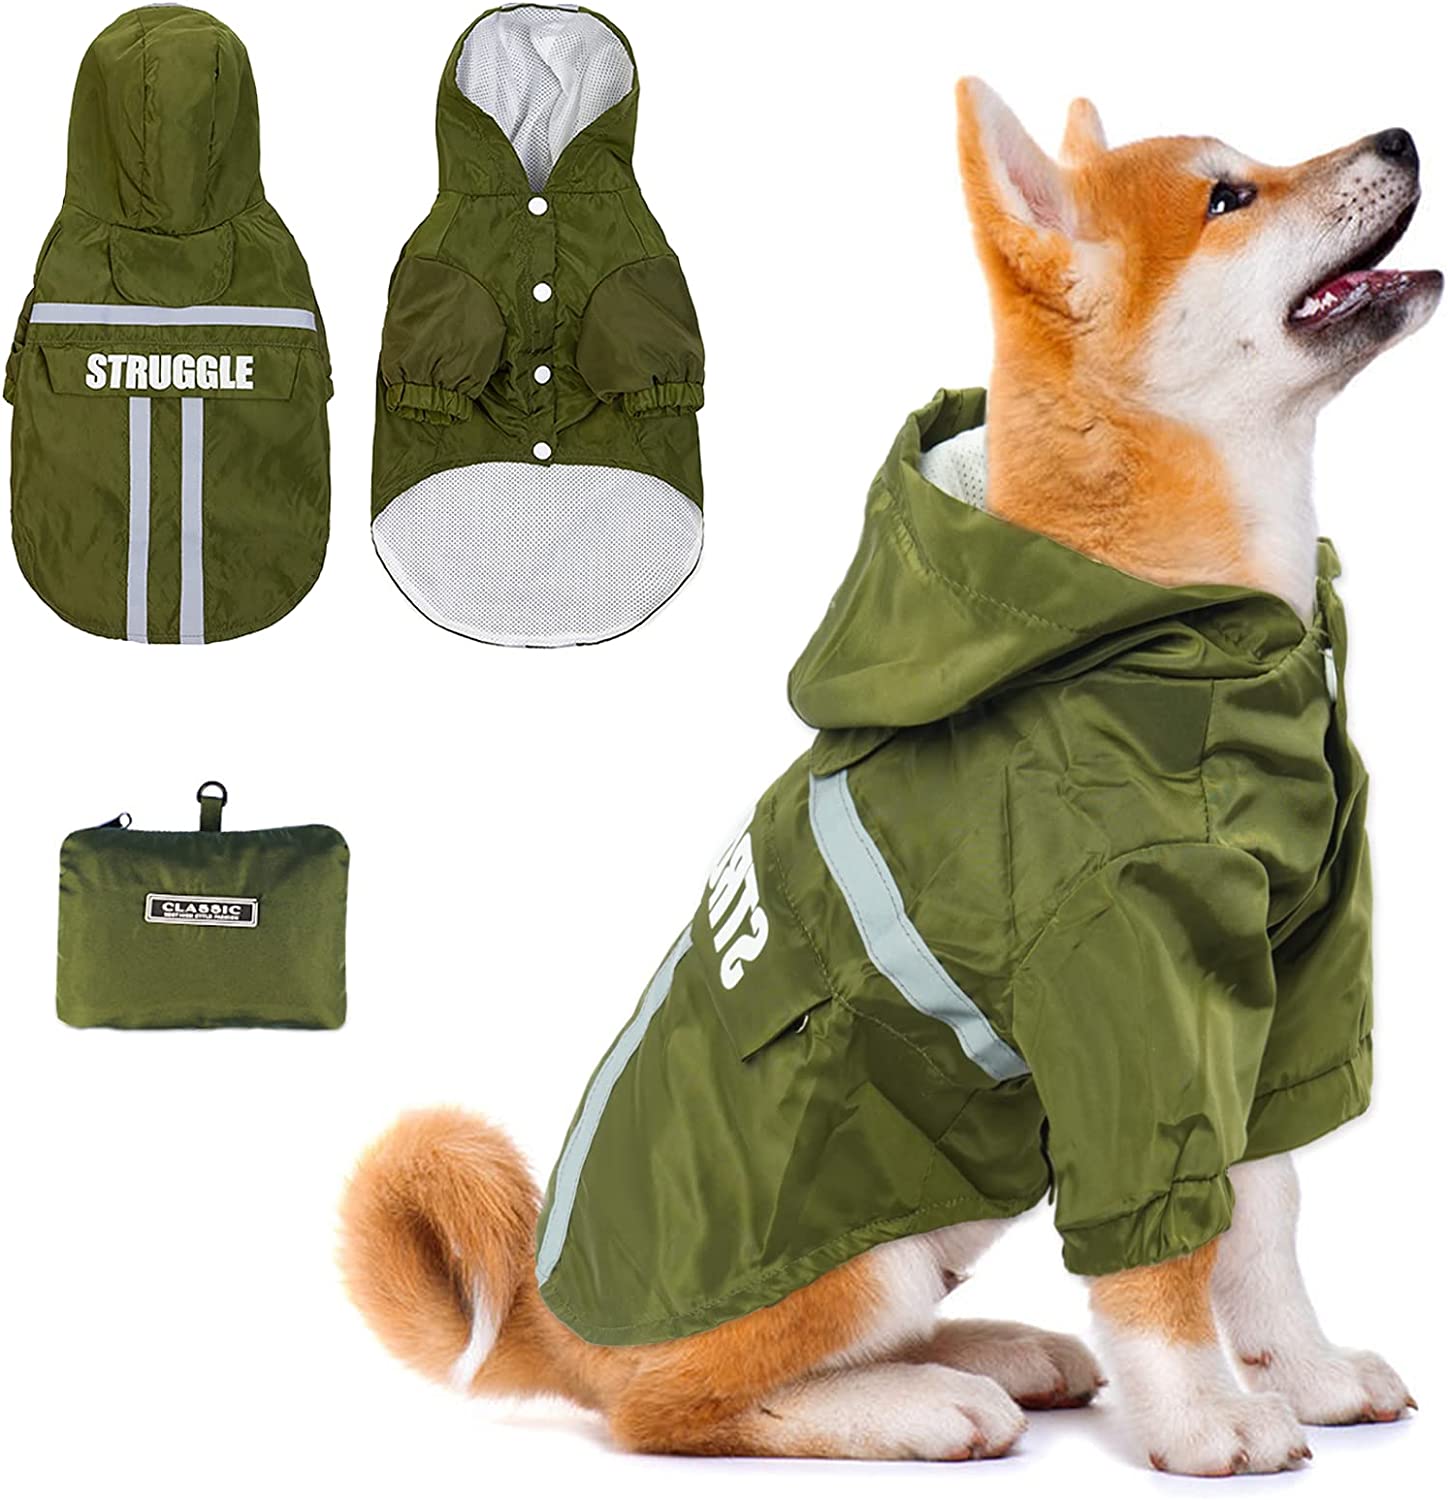 T’CHAQUE Dog Raincoat Hooded with Reflective Strip, Lightweight and Breathable Waterproof Dog Slicker Poncho Jacket, Stylish Folding Rainwear Jumpsuit for Puppy, Small and Medium Dogs, Green XXL